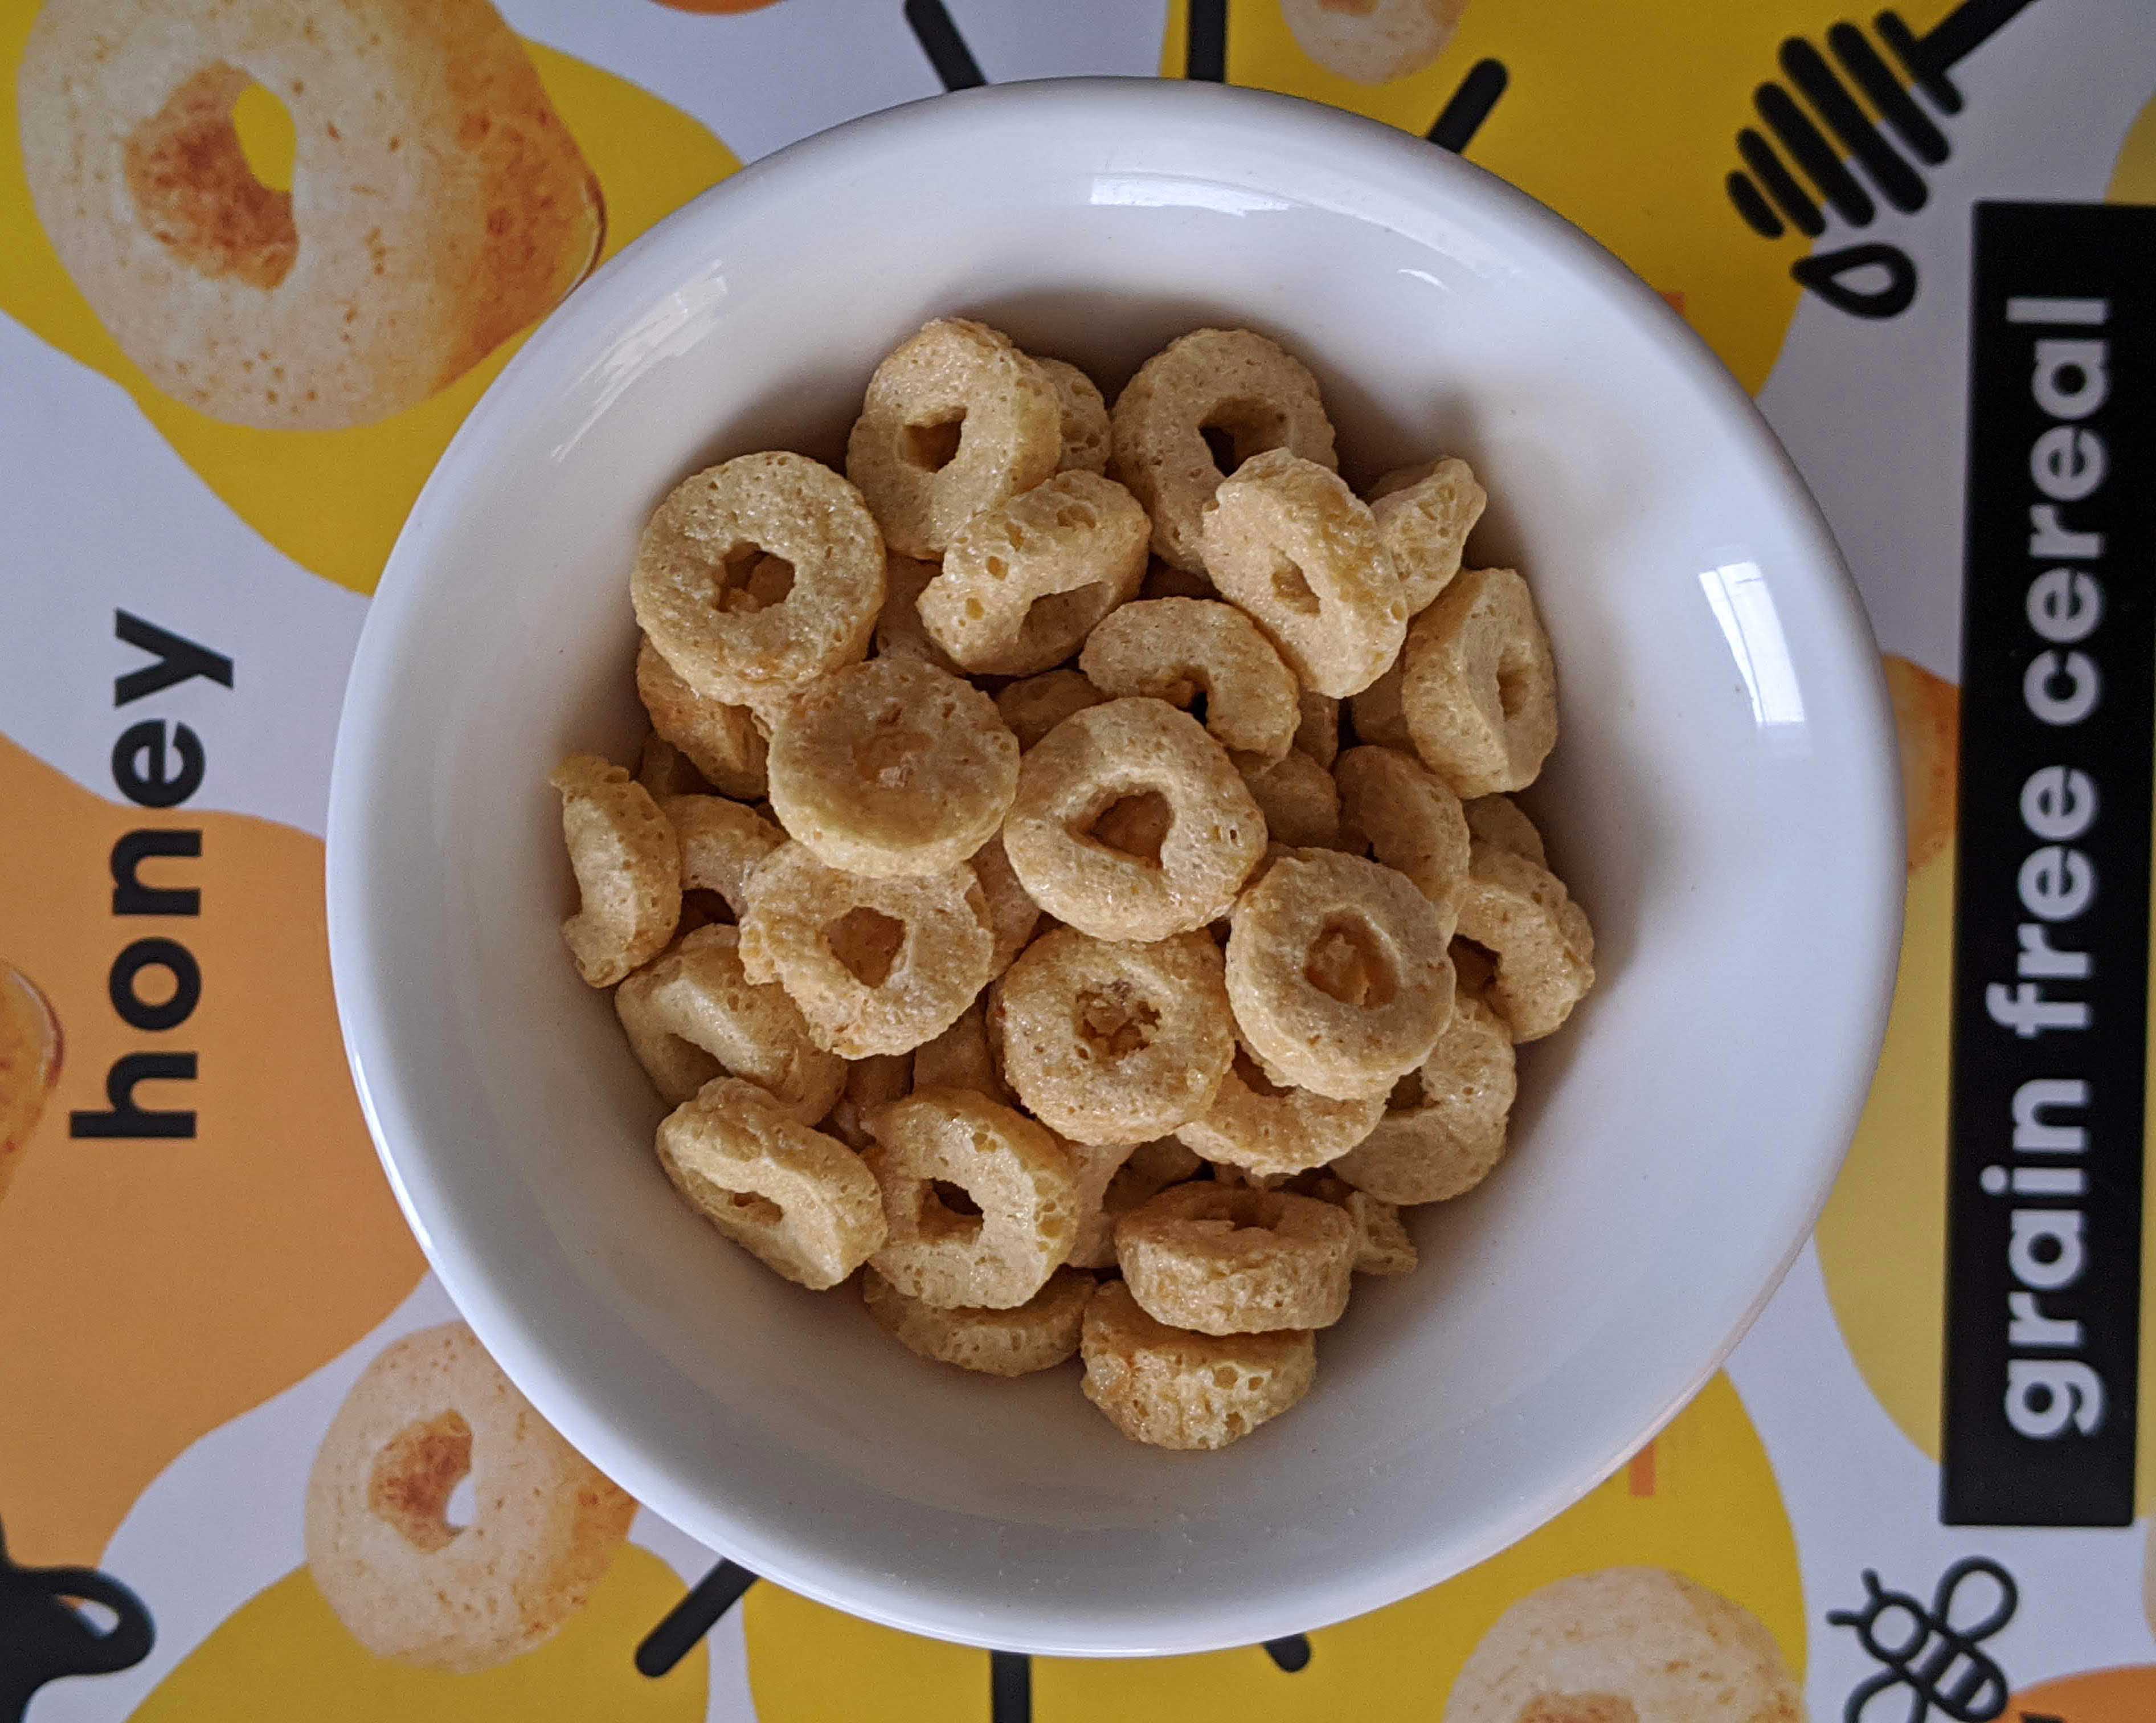 https://www.cerealously.net/wp-content/uploads/2019/12/grain-free-three-wishes-cereal-review-honey.jpg